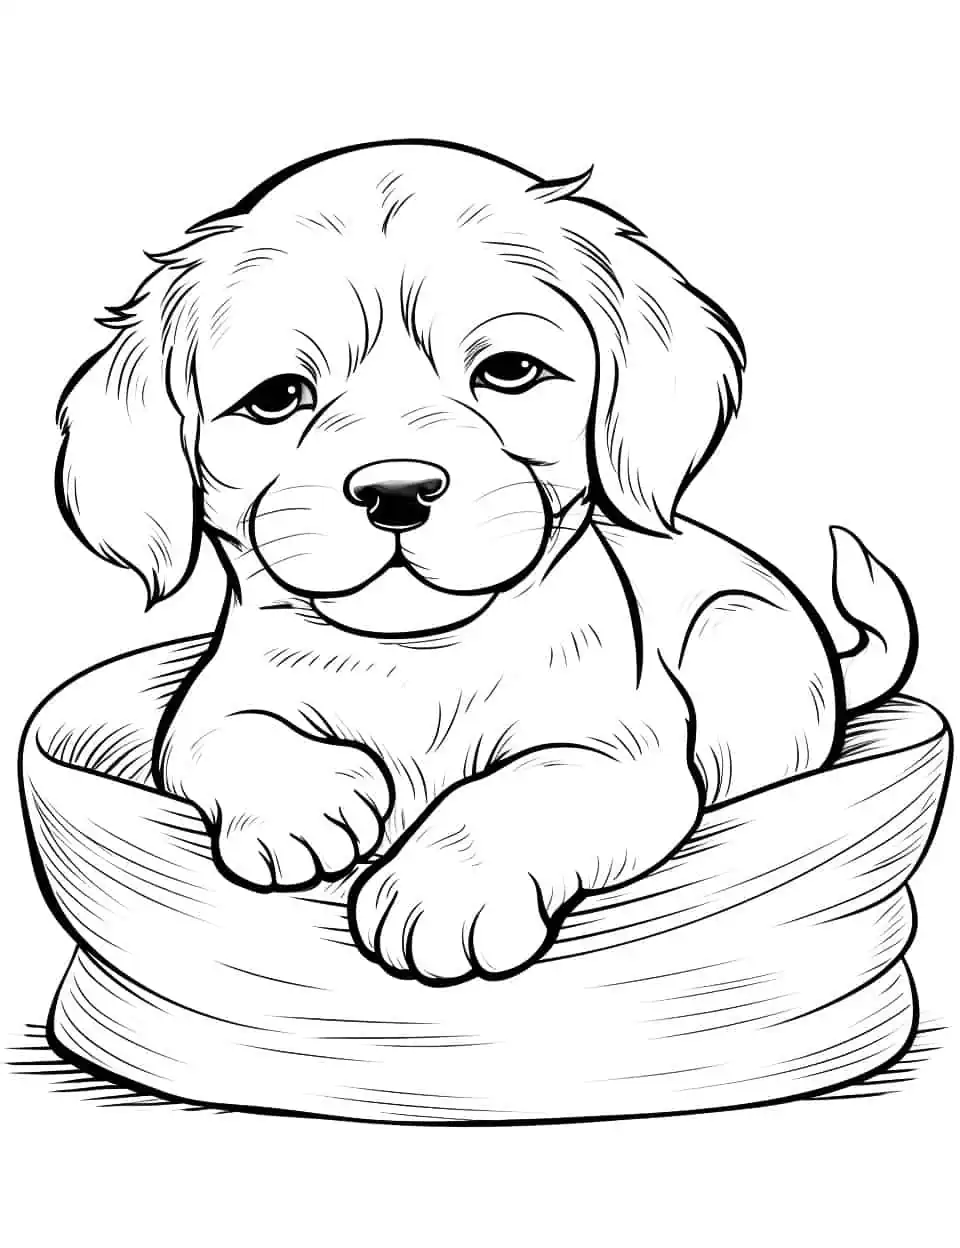 Baby Dog's Nap Time Dog Coloring Page - A baby dog sleeping soundly in its cozy bed.